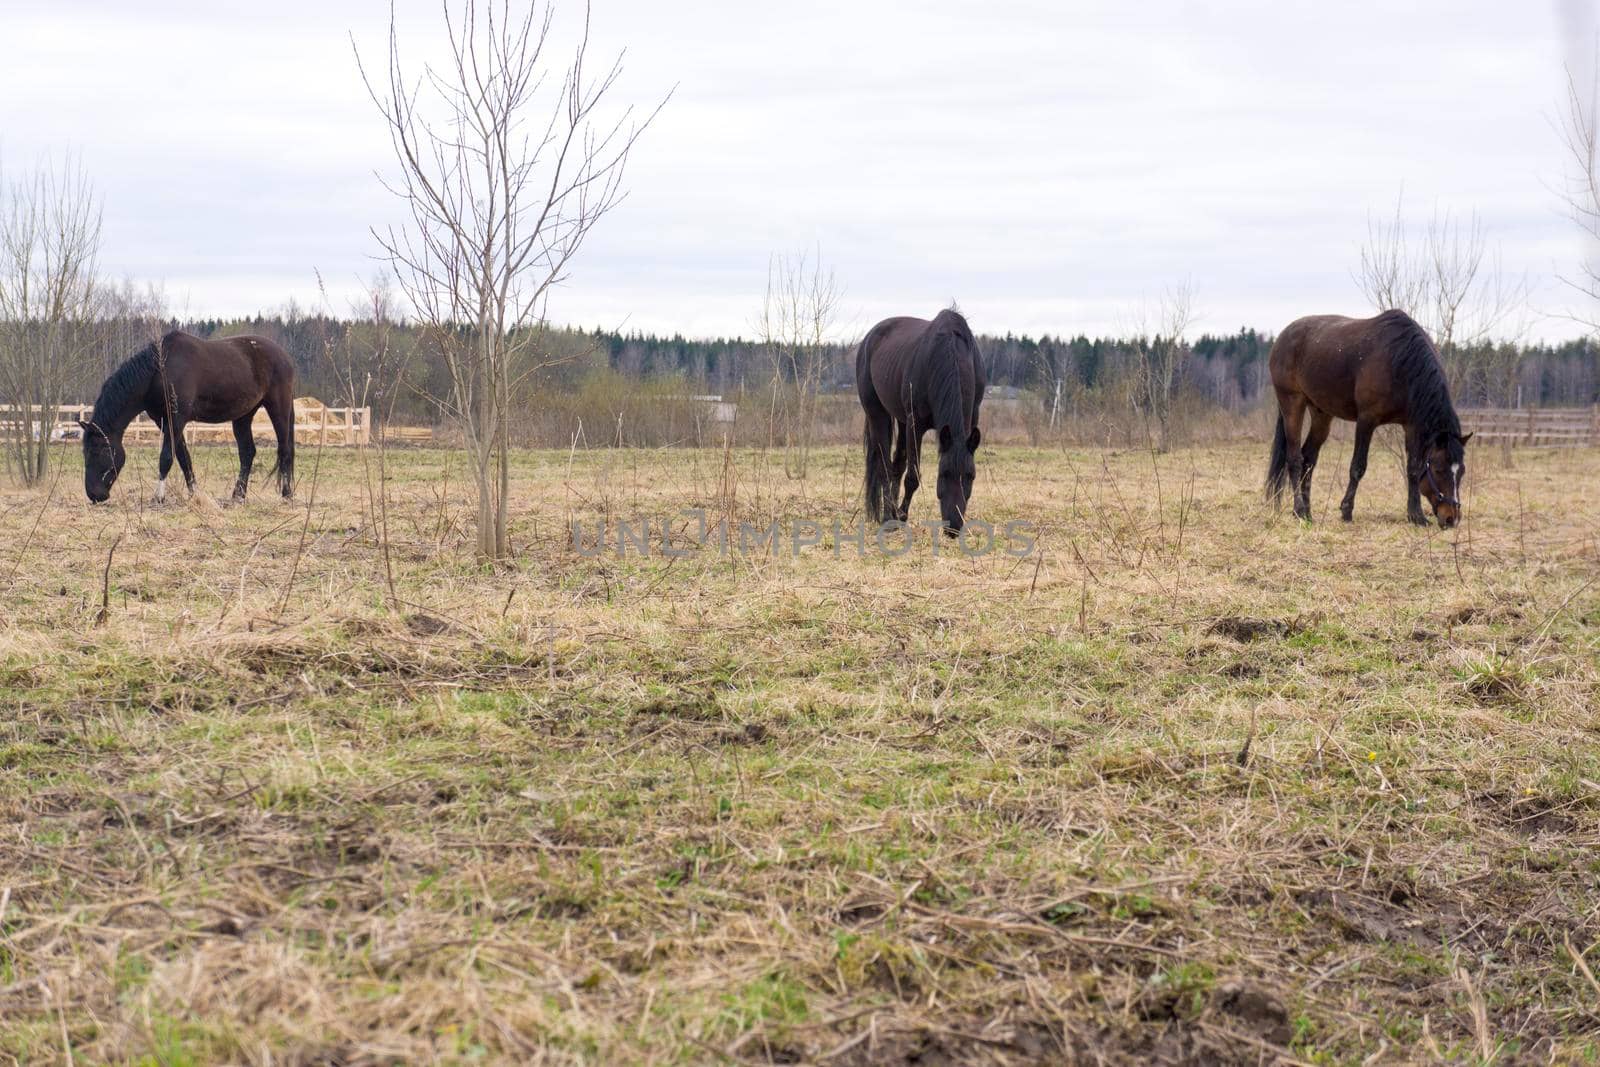 Herd of conik horses on a pasture in withered grass